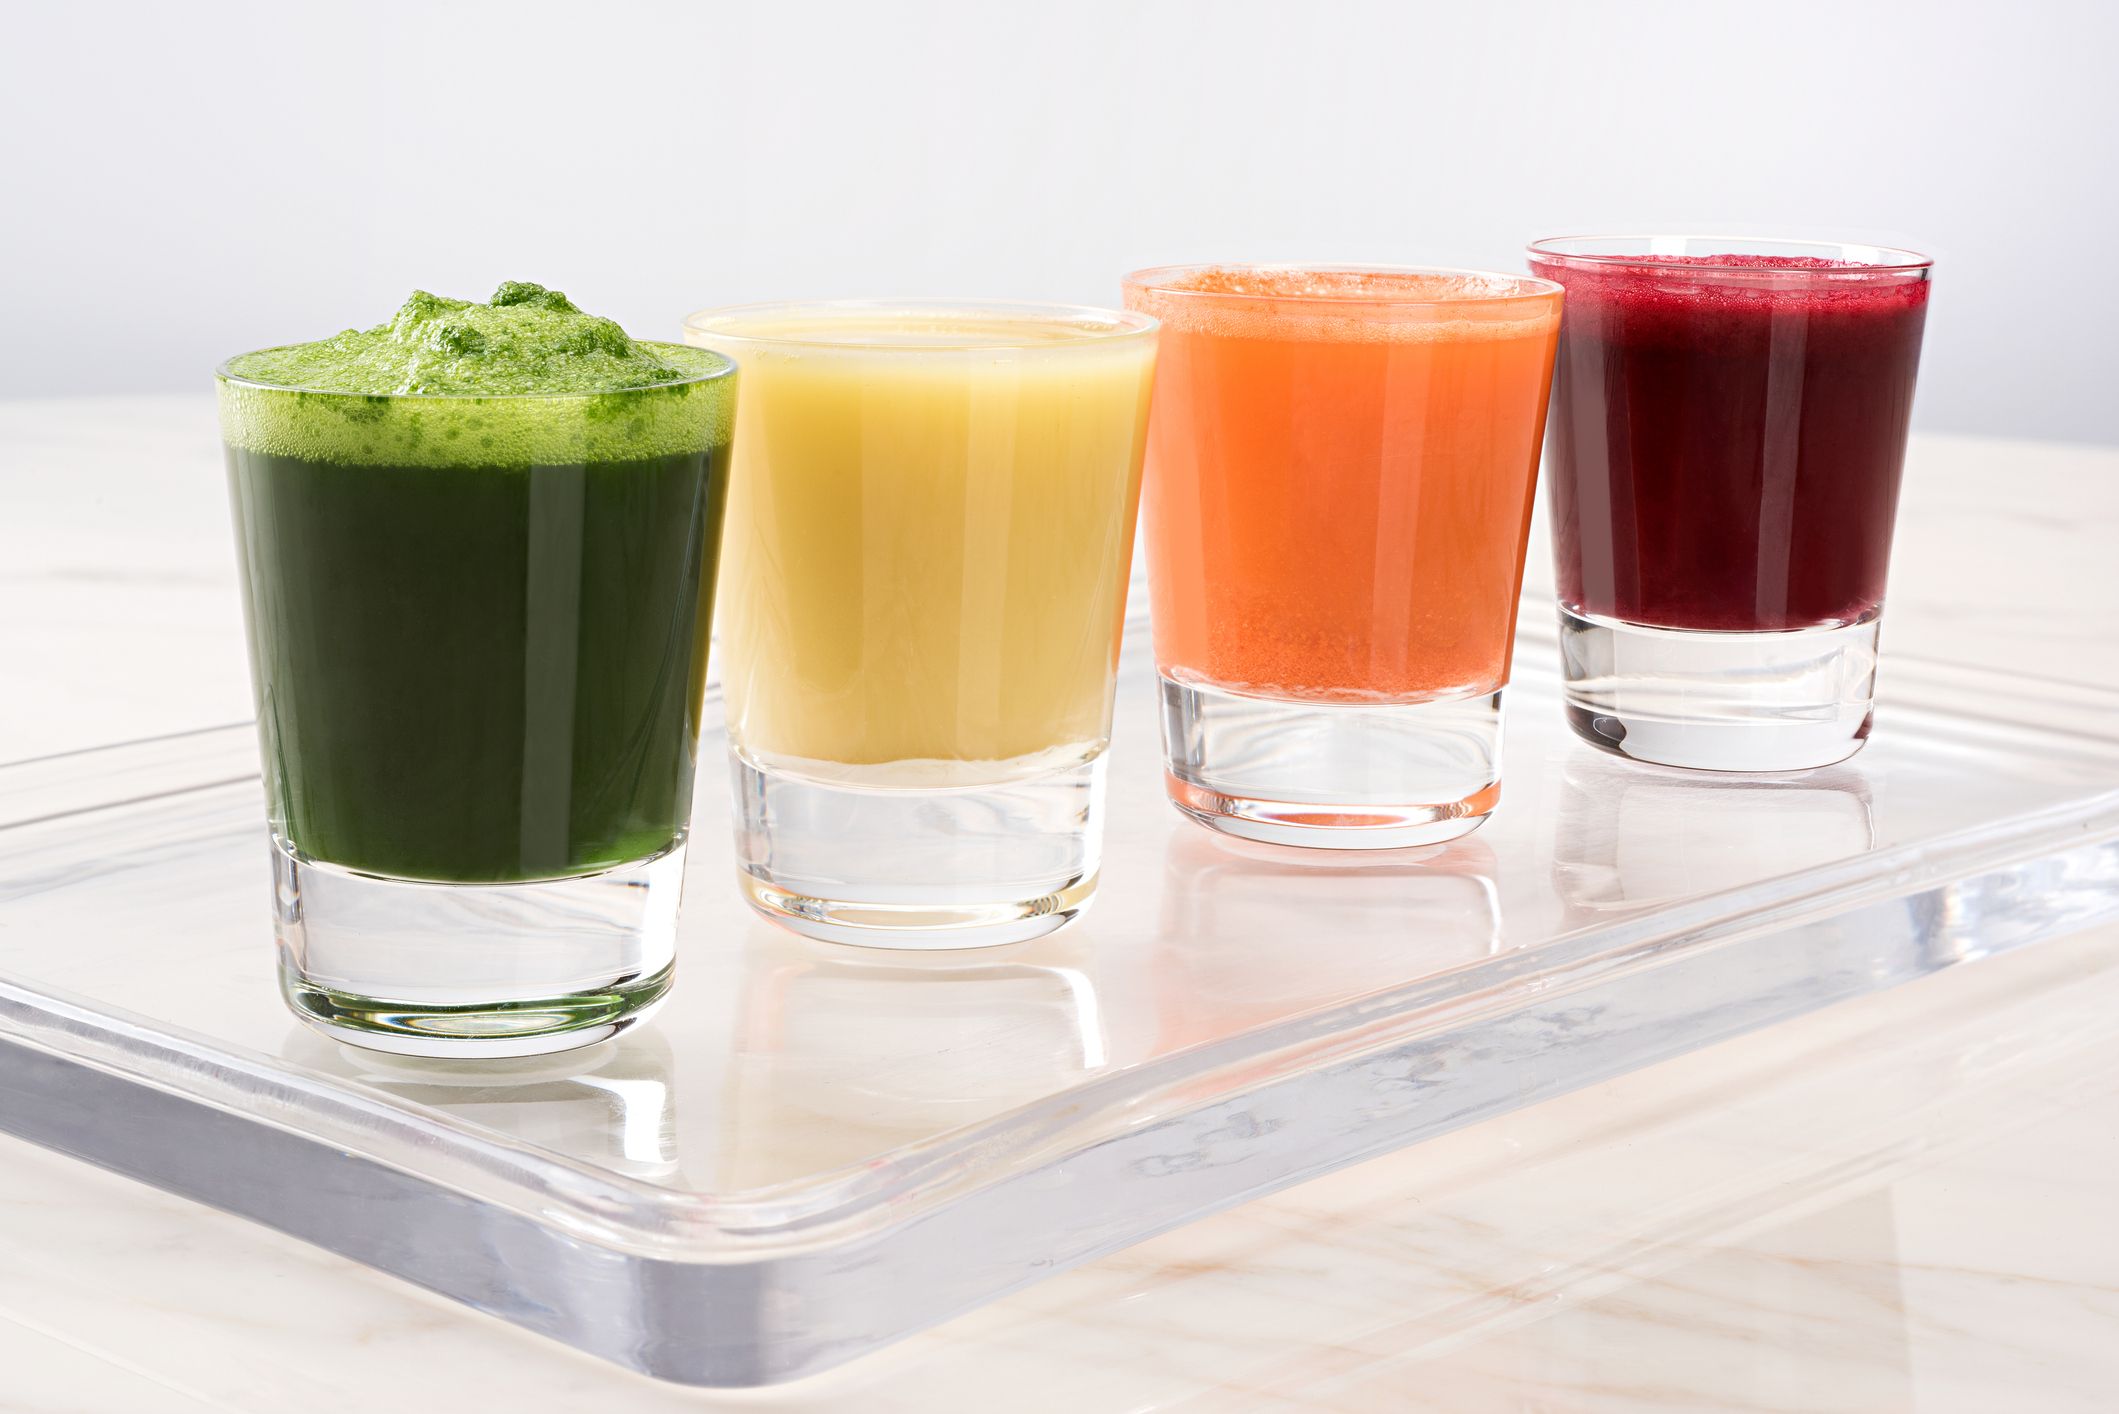 The 8 Best Juices for Weight Loss